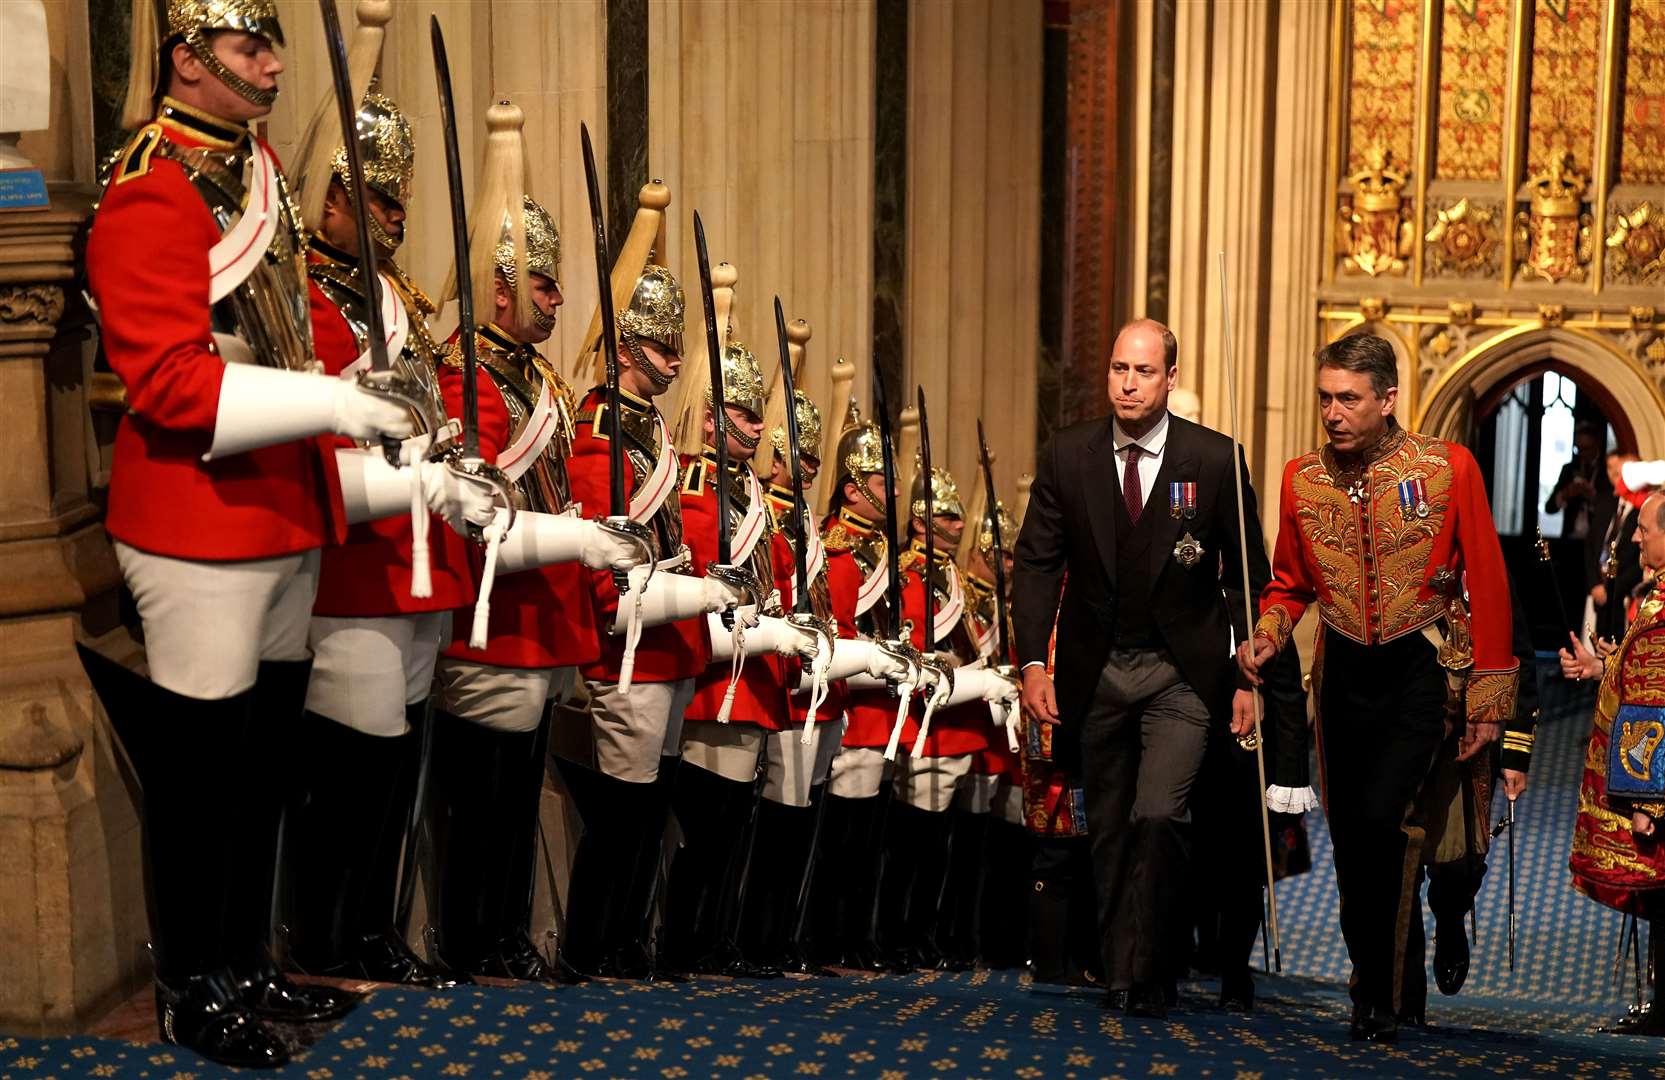 The Duke of Cambridge walks past the Household Cavalry in the Norman Porch at the Palace of Westminster (Aaron Chown/PA)